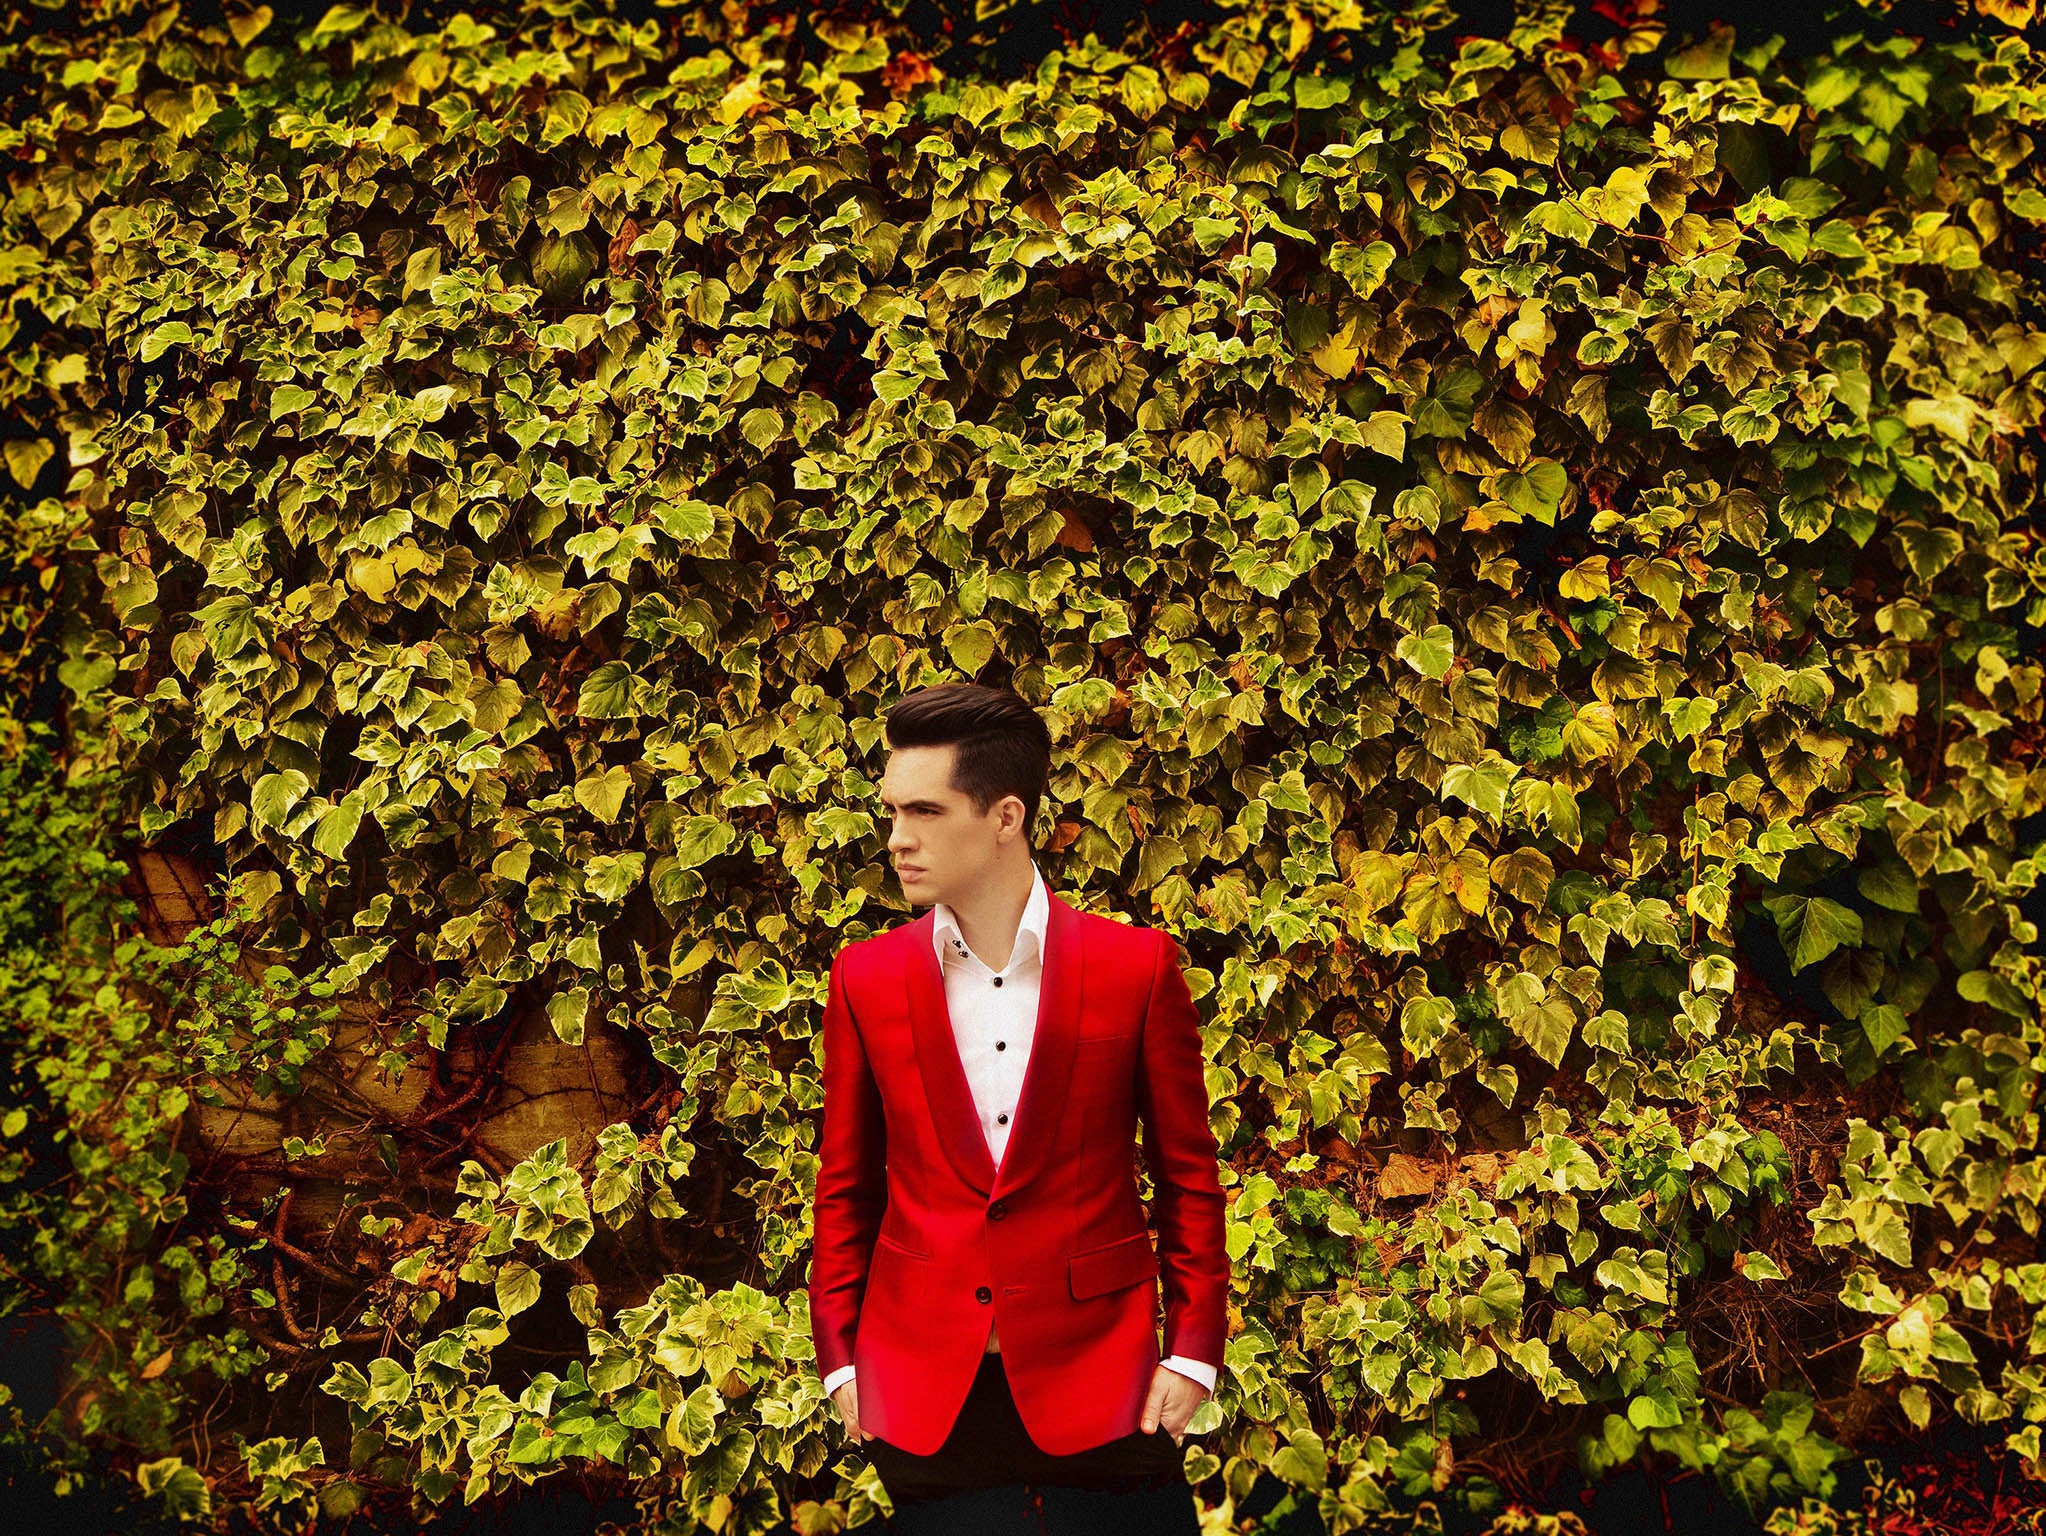 Original front-man on Panic! At The Disco, Brendon is now the only original member left